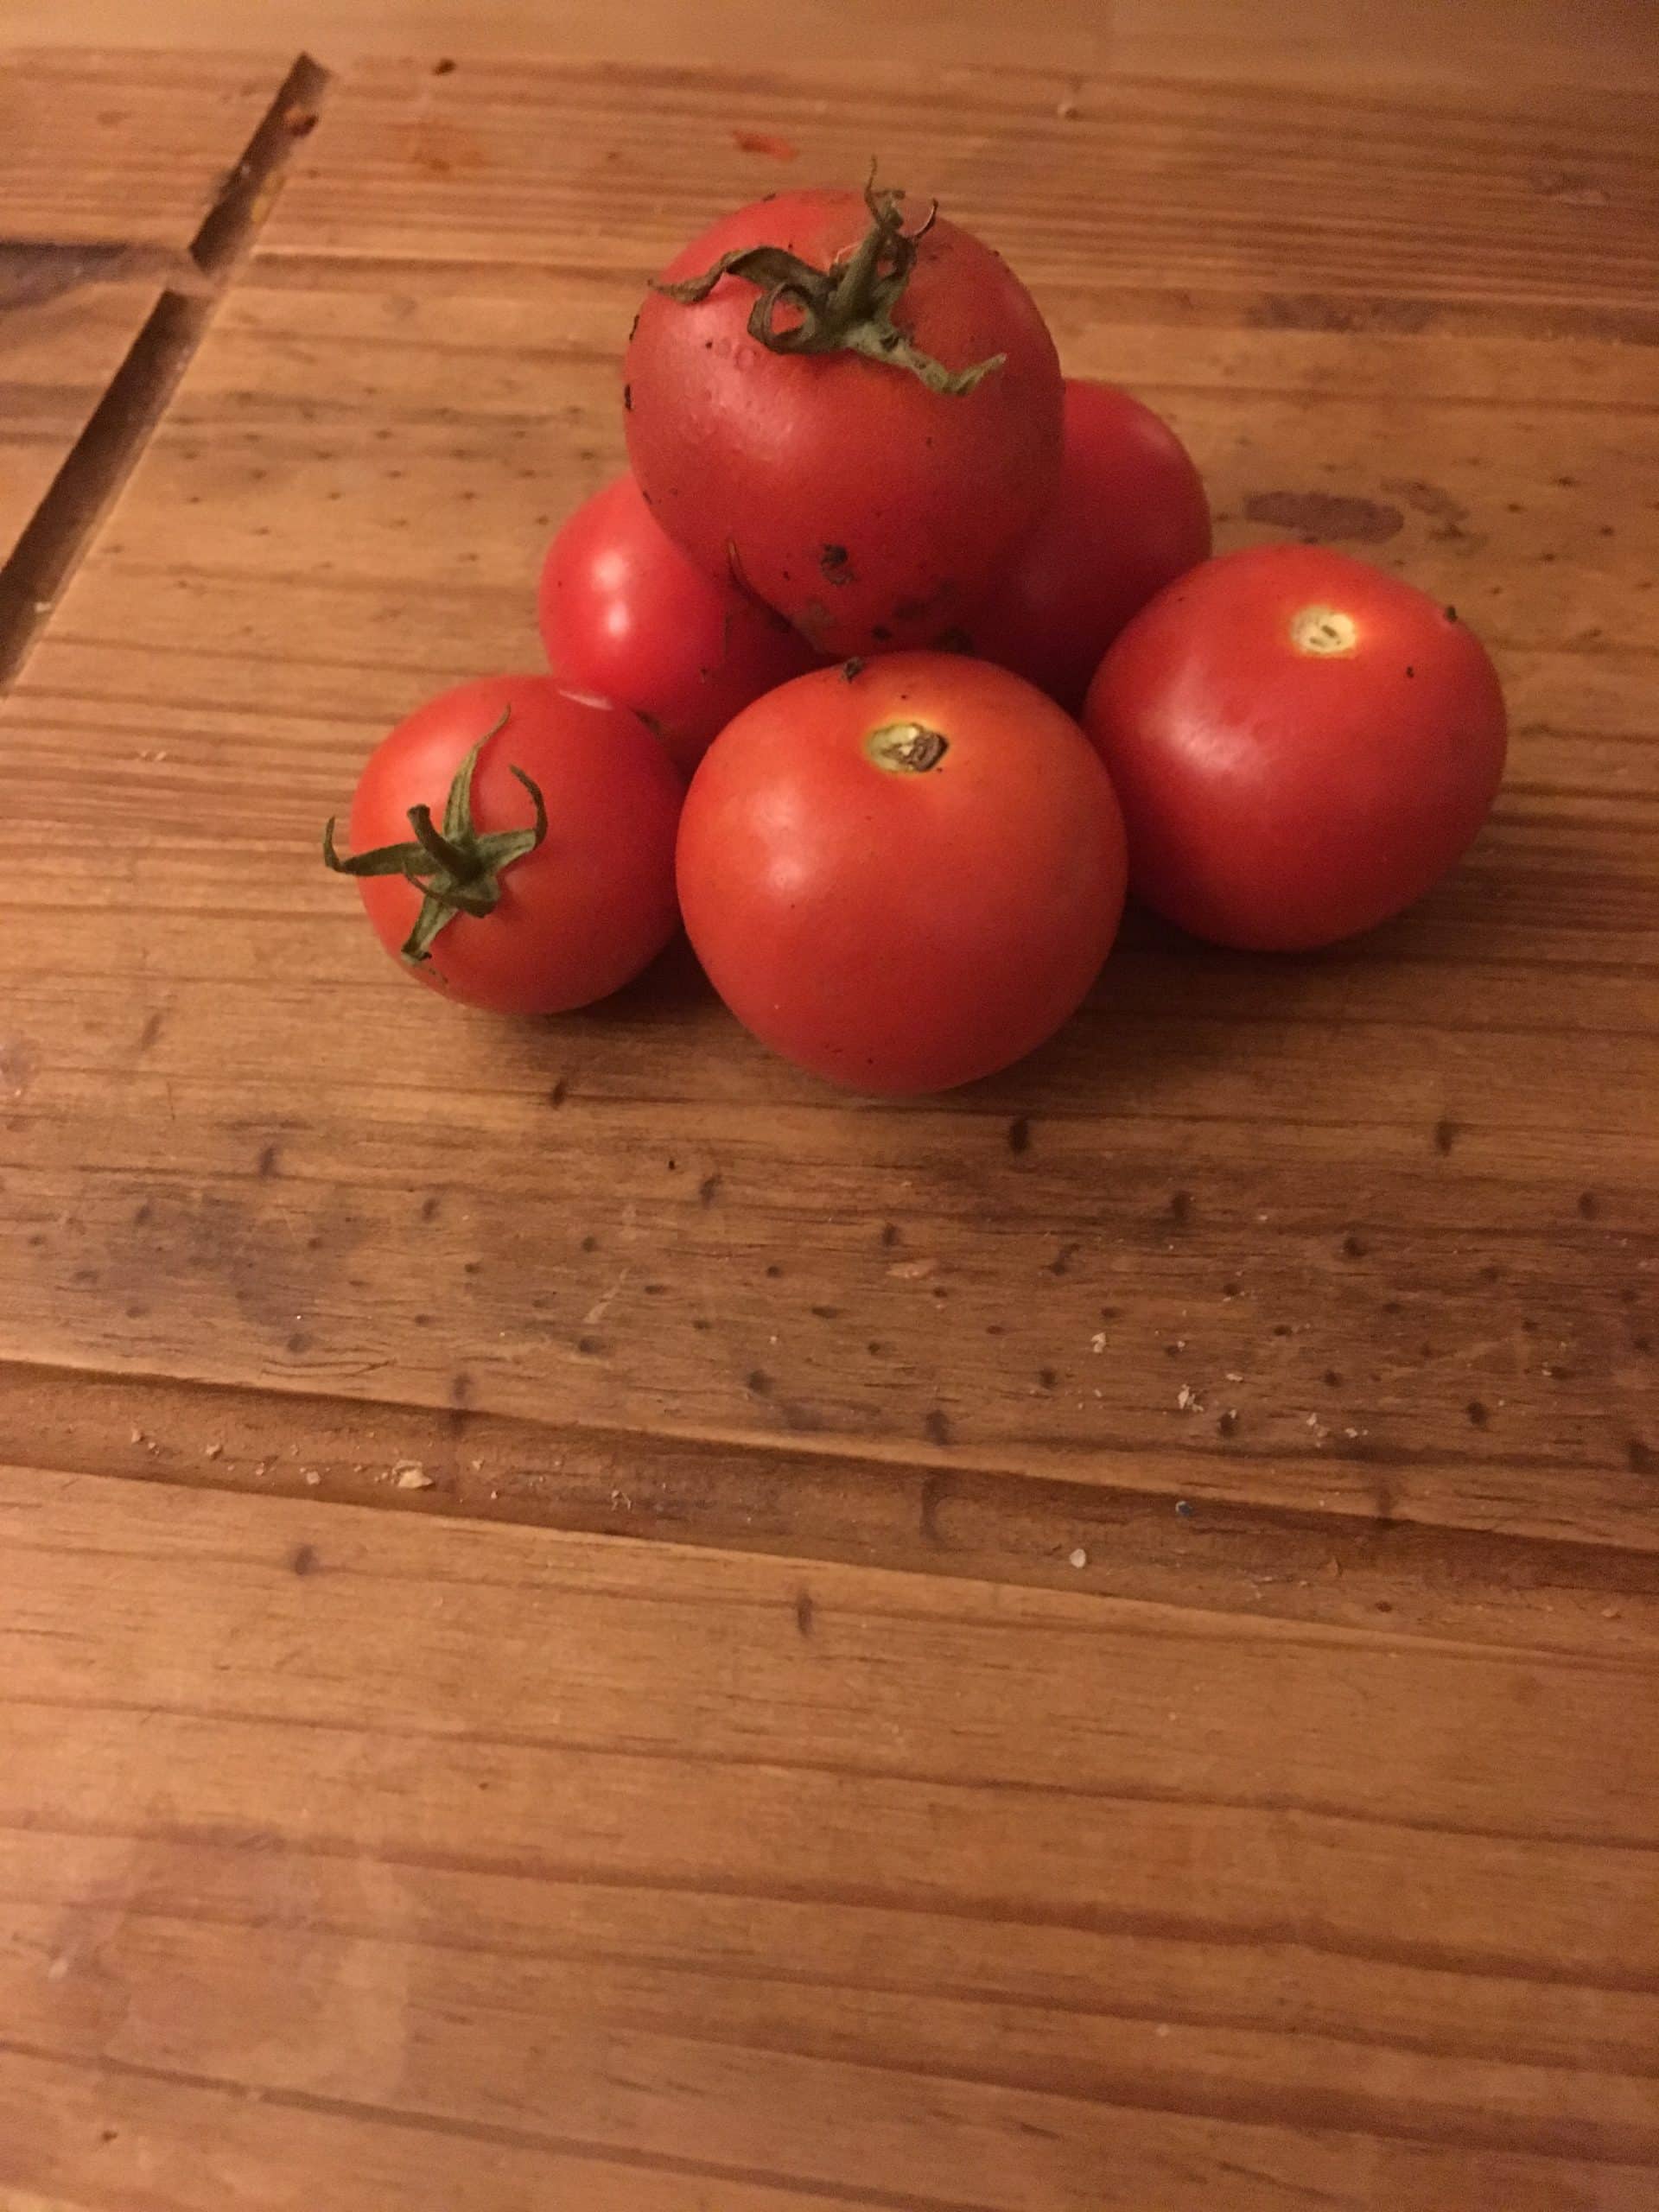 Why we love growing businesses as much as tomatoes